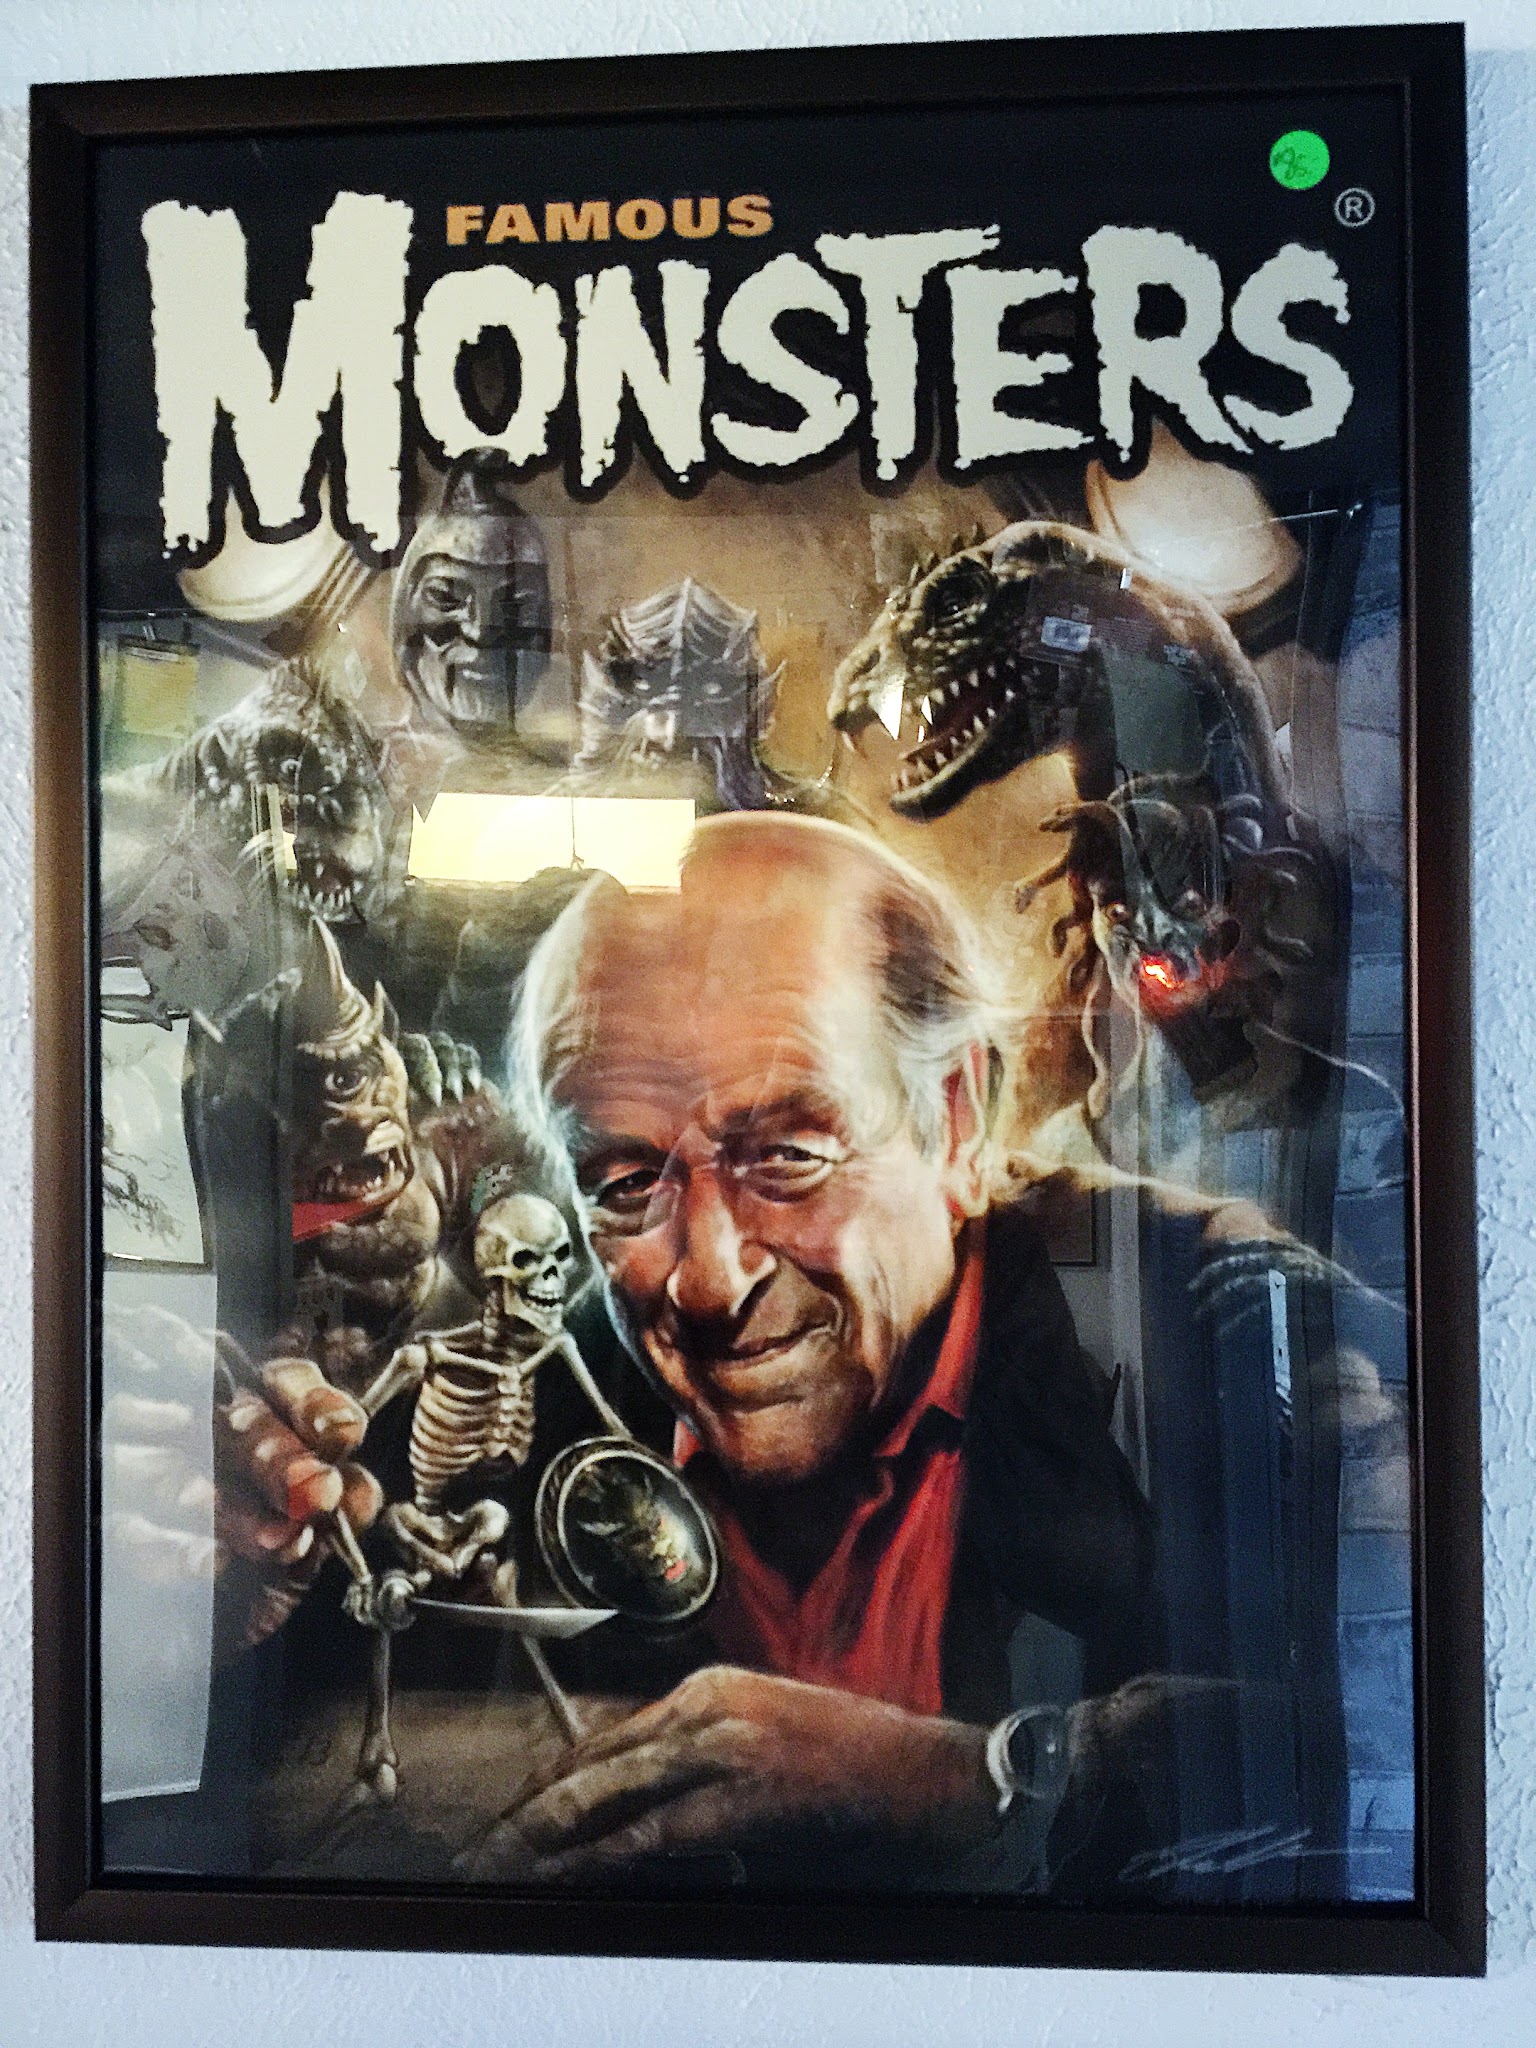 A tribute poster to Ray Harryhausen